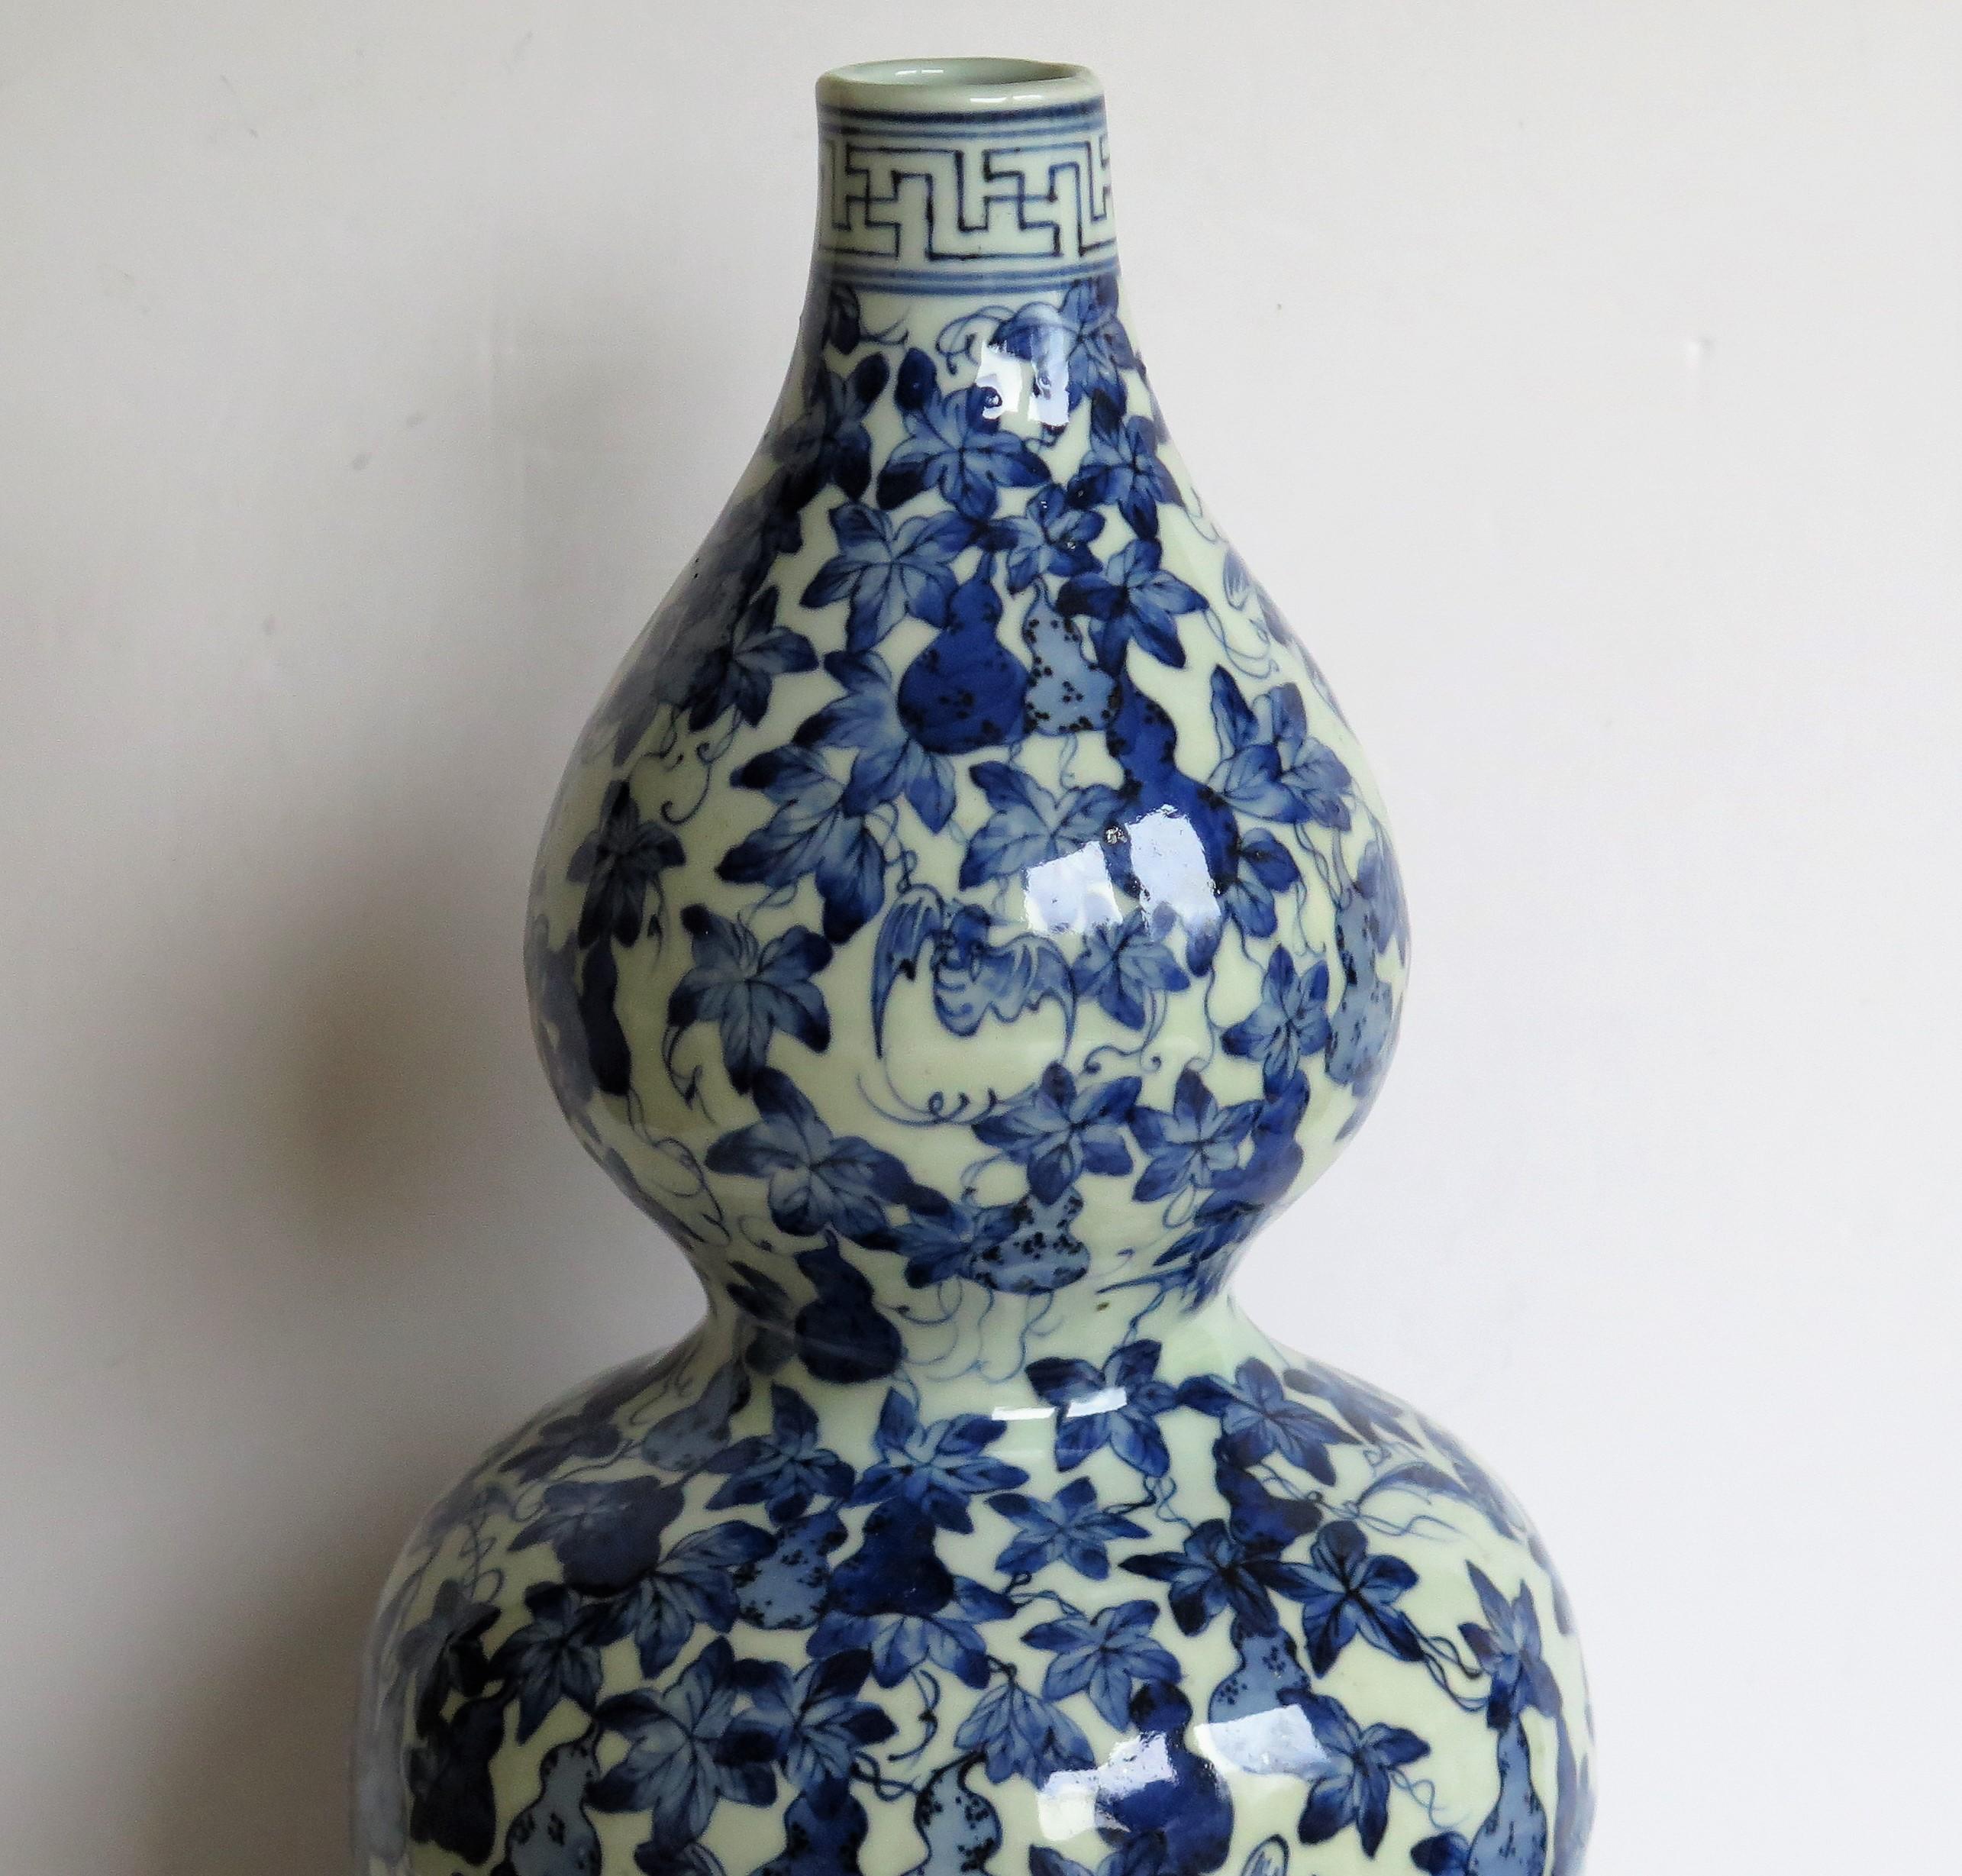 19th Century Chinese Export Porcelain Vase Blue & White Hand Painted 34cm tall Mid 19thC Qing